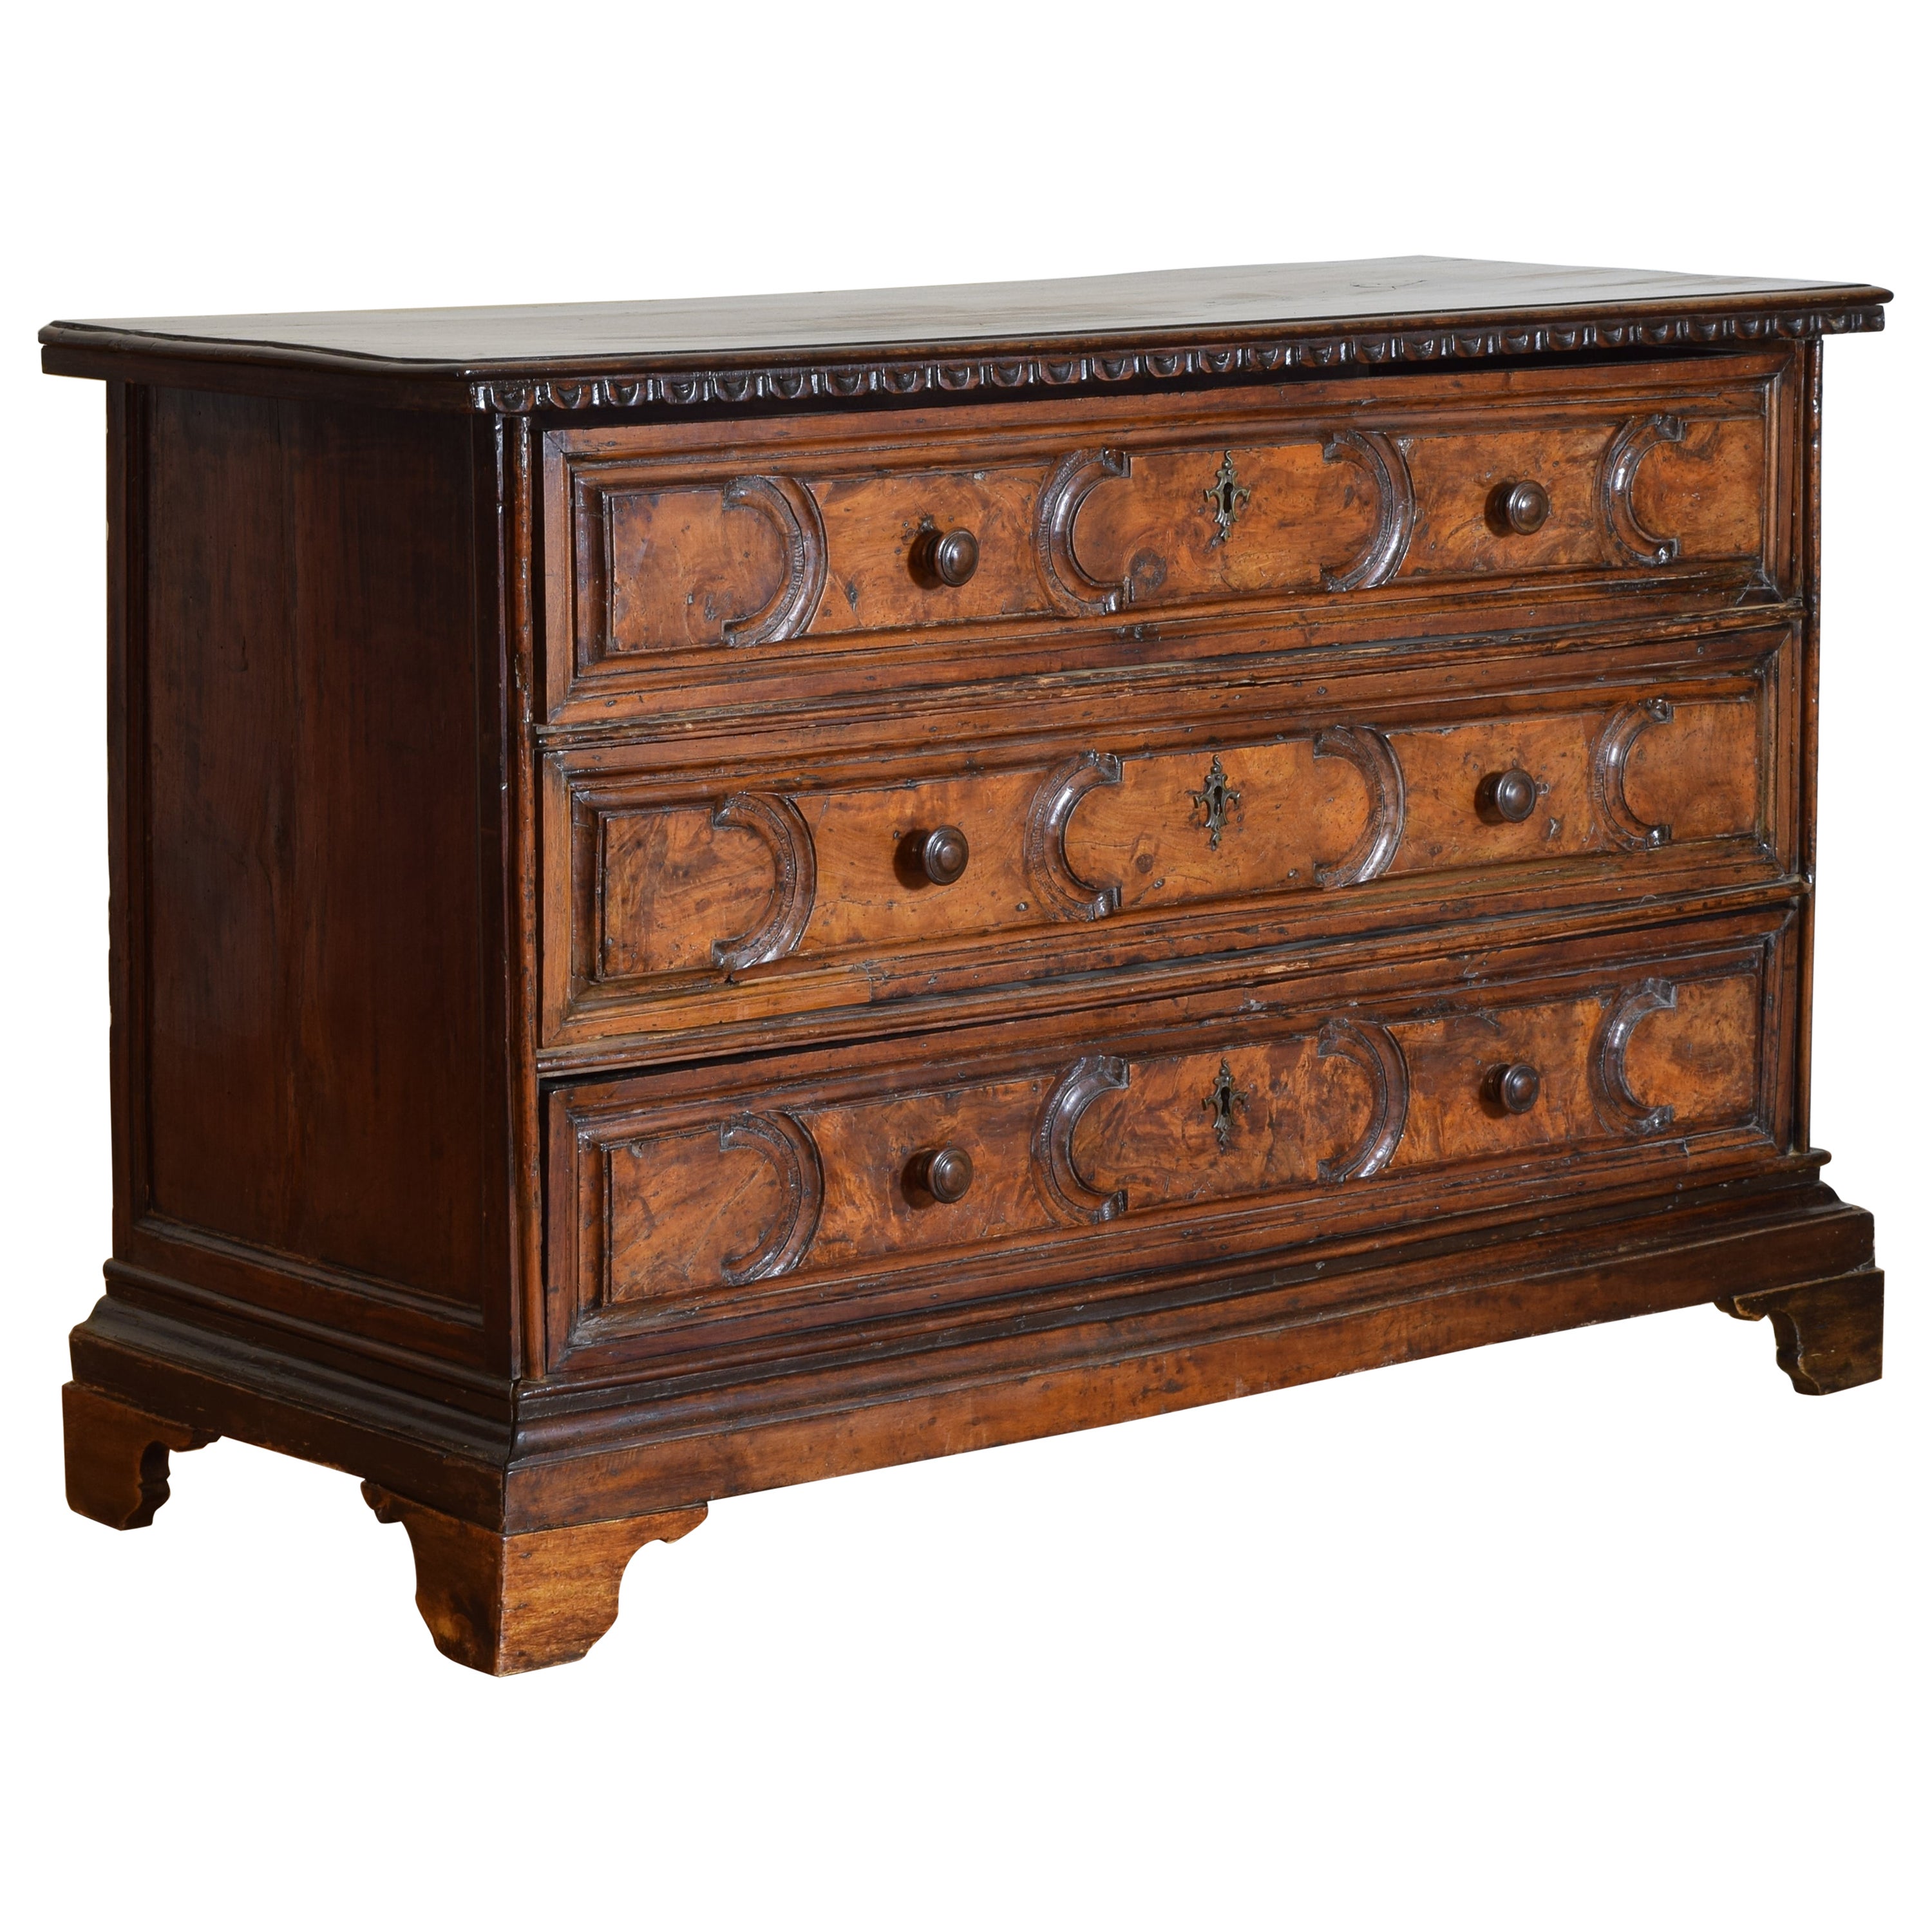 Italian, Lombardia Carved Walnut 3- Drawer Commode, Early 18th C